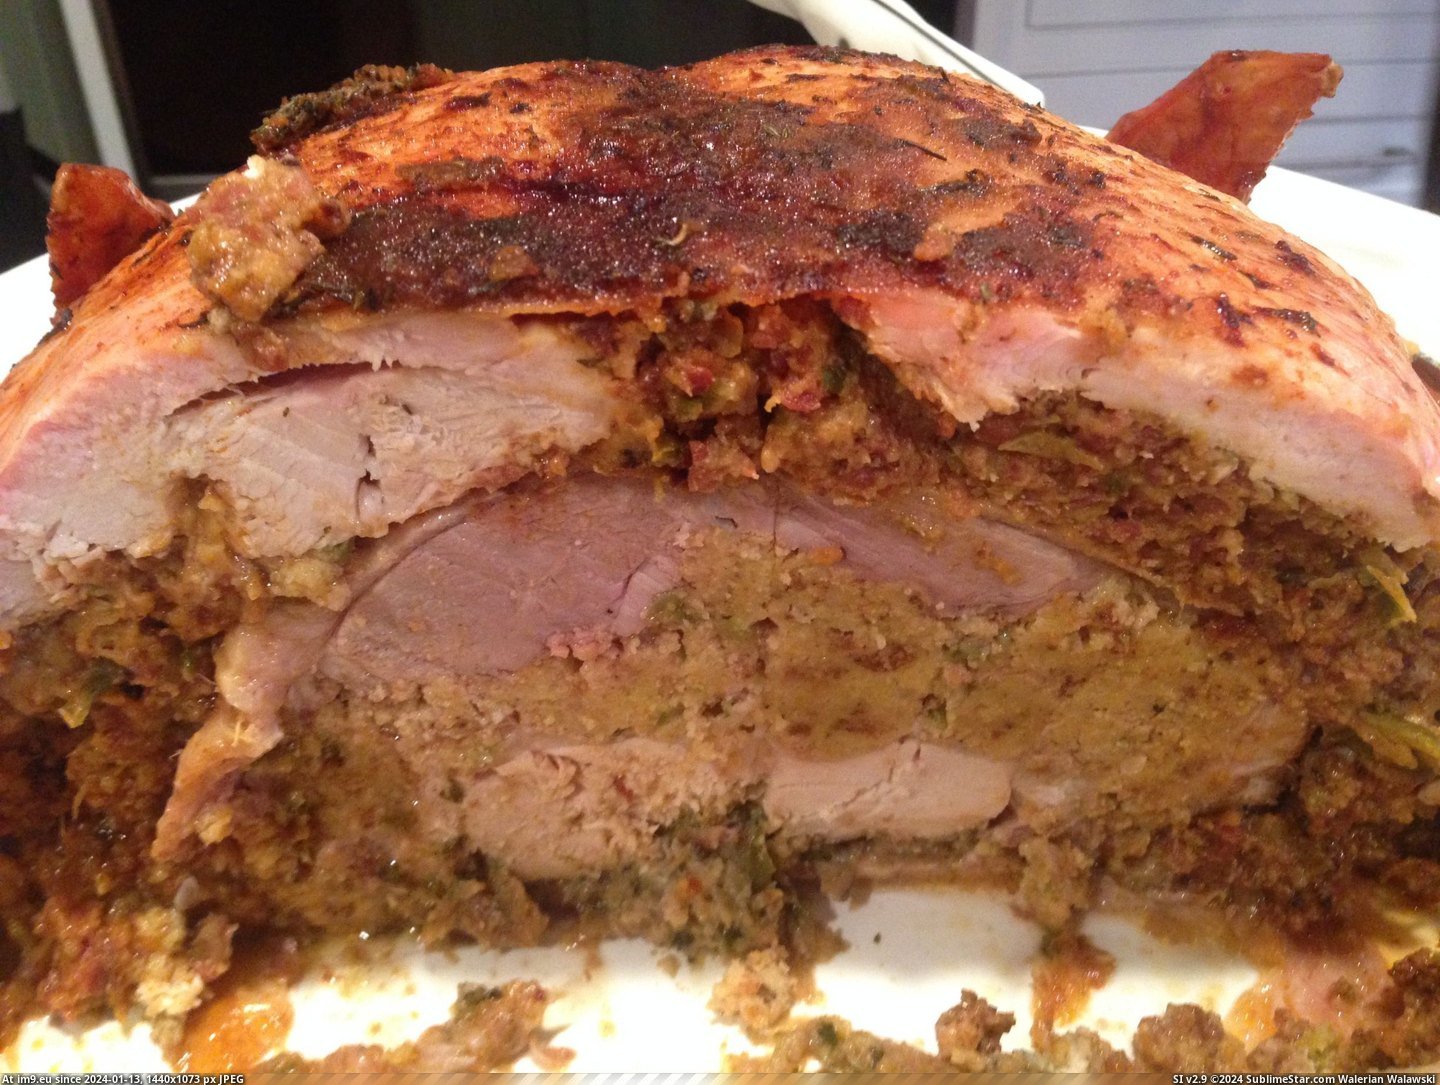 #For #Year #Thought #Duck #Thanksgiving #Turkey #Turducken #Family #See #Chicken [Pics] My family makes turducken (a chicken in a duck in a turkey) every year for Thanksgiving. Thought reddit would like to see Pic. (Image of album My r/PICS favs))